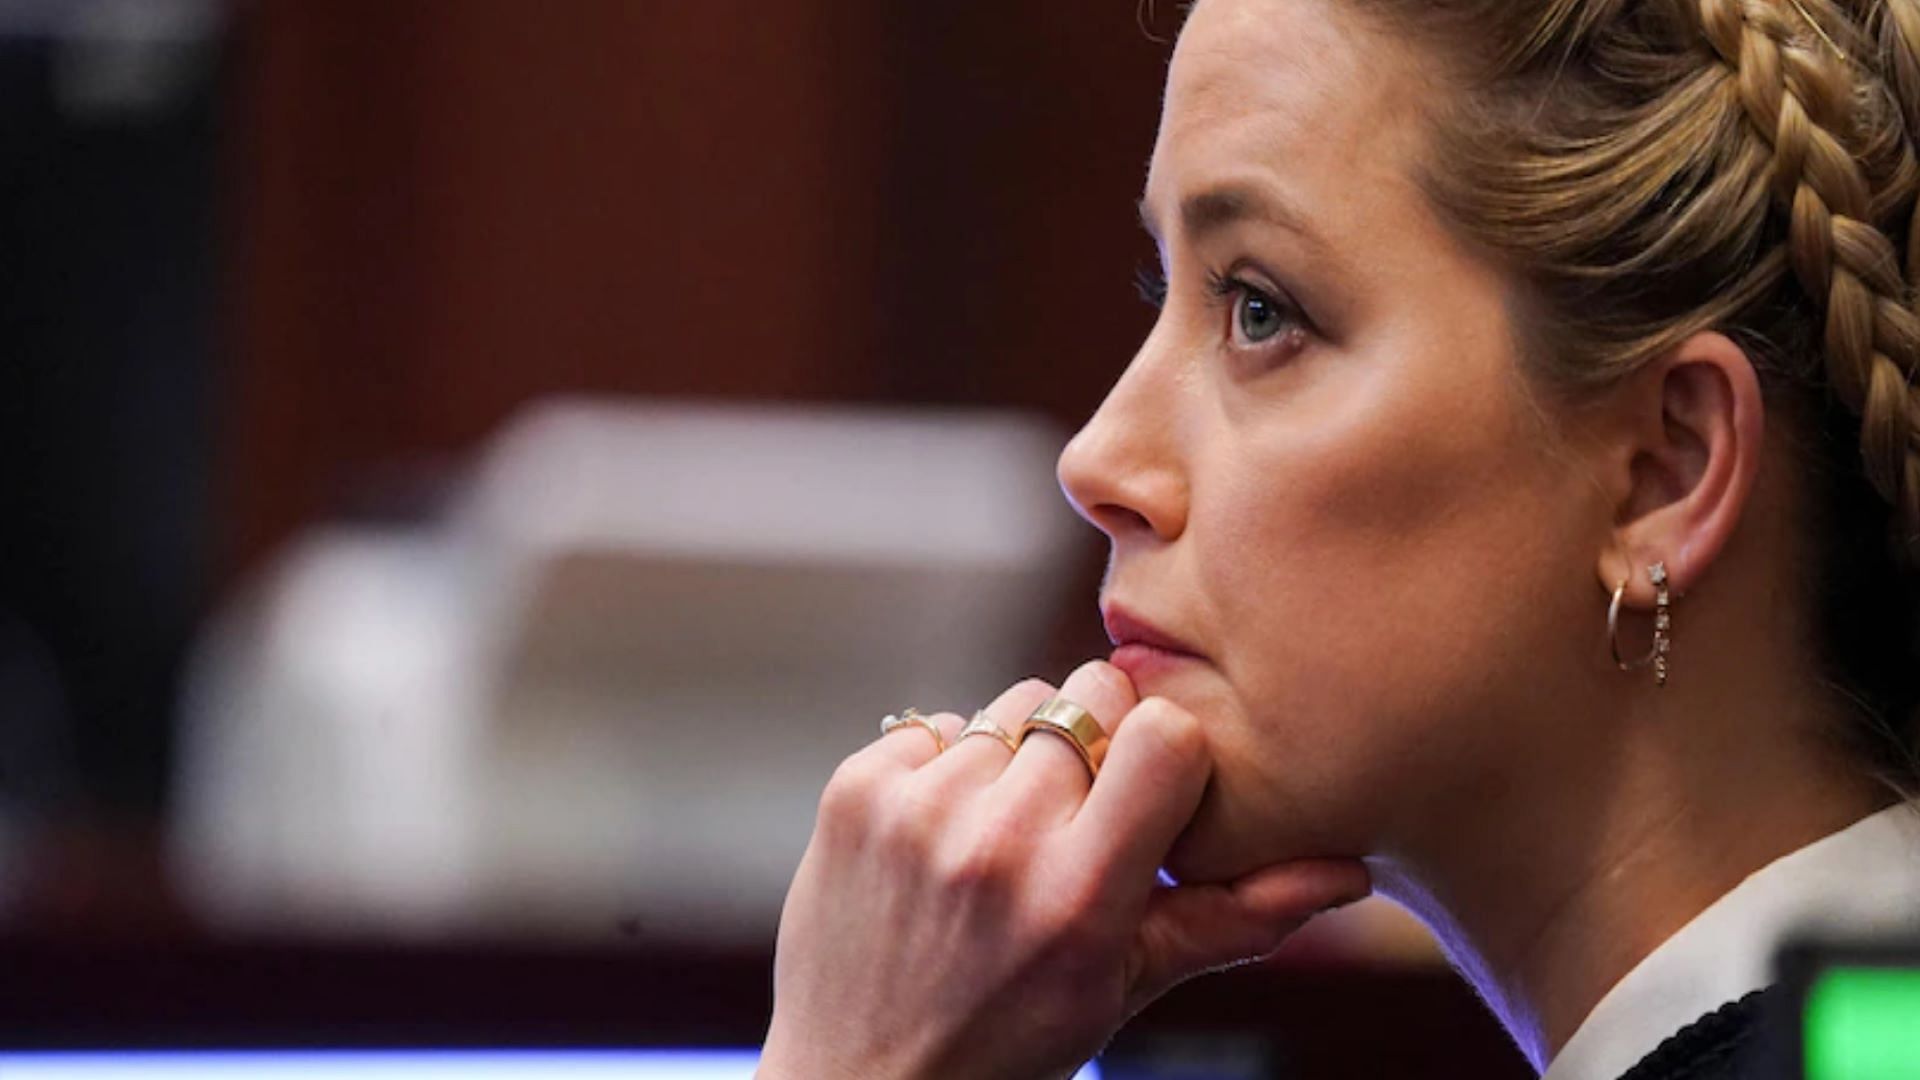 Amber Heard in the trial (Image via Shawn Thew)